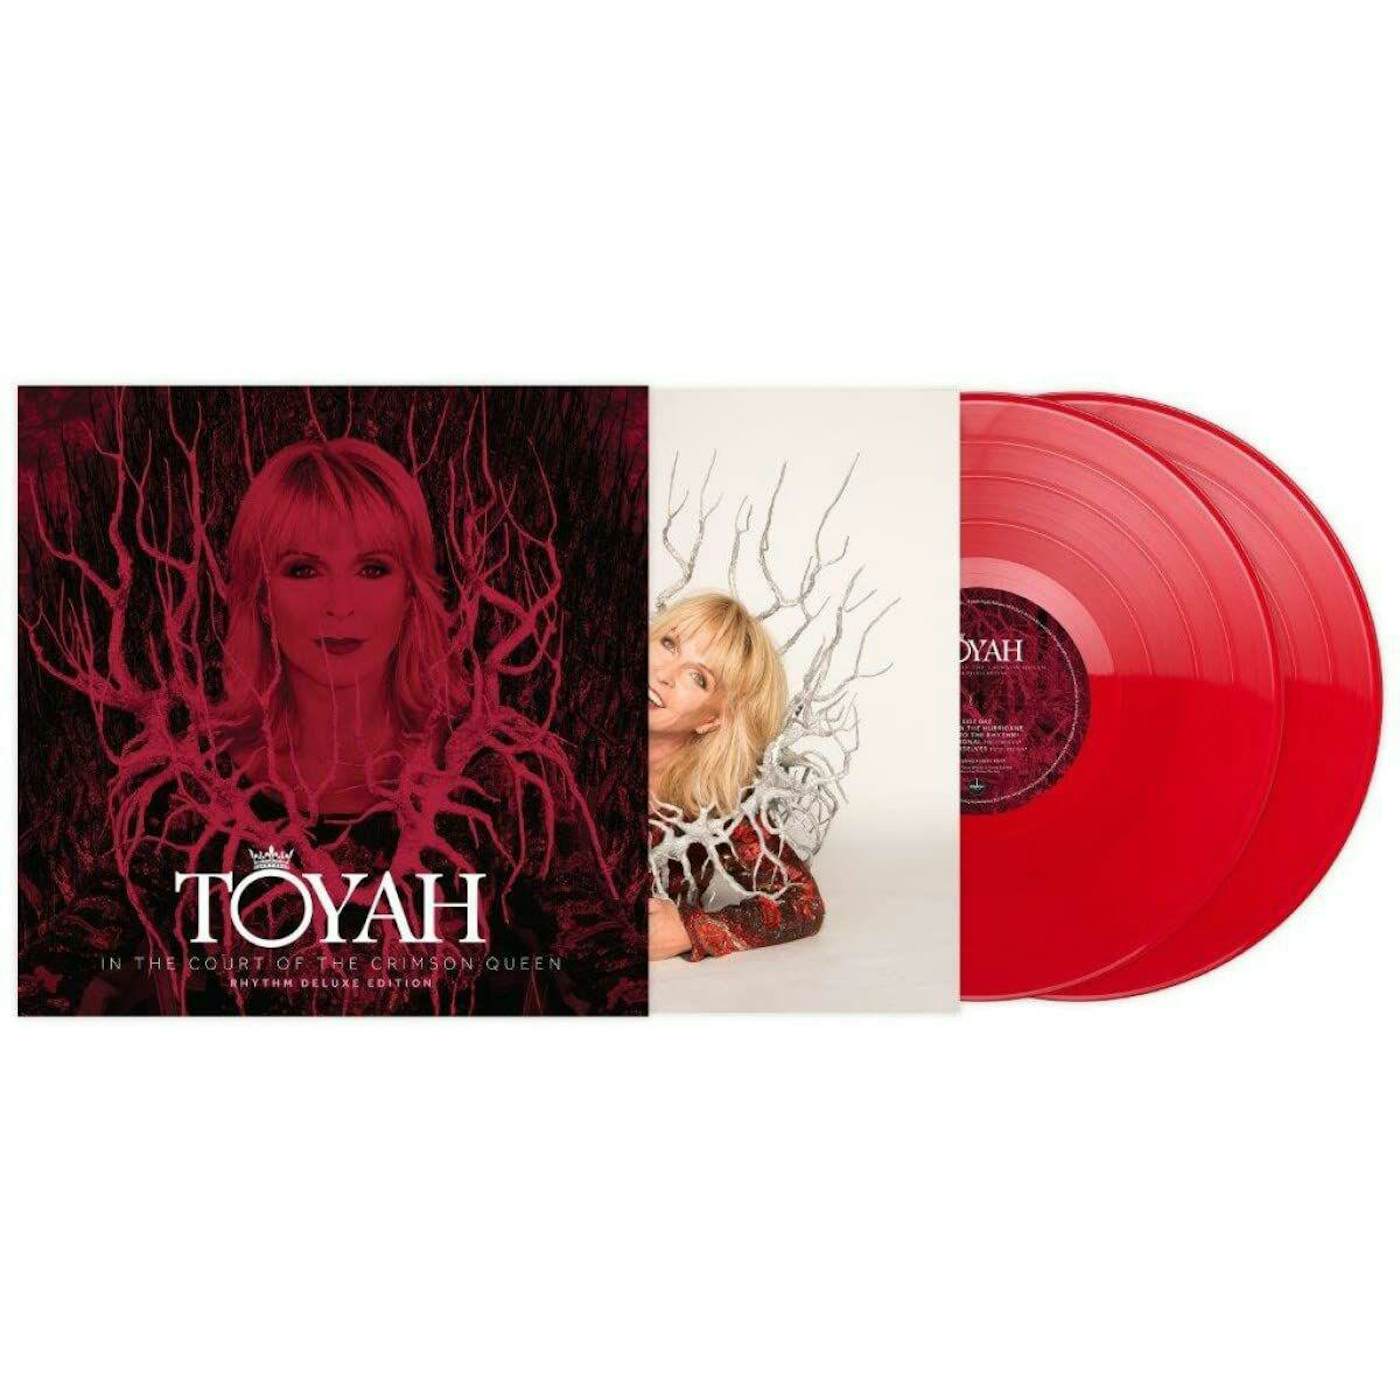 Toyah In The Court Of The Crimson Queen: Rhythm (Deluxe Edition/Red/140g/Revised Artwork & Lyrics) Vinyl Record